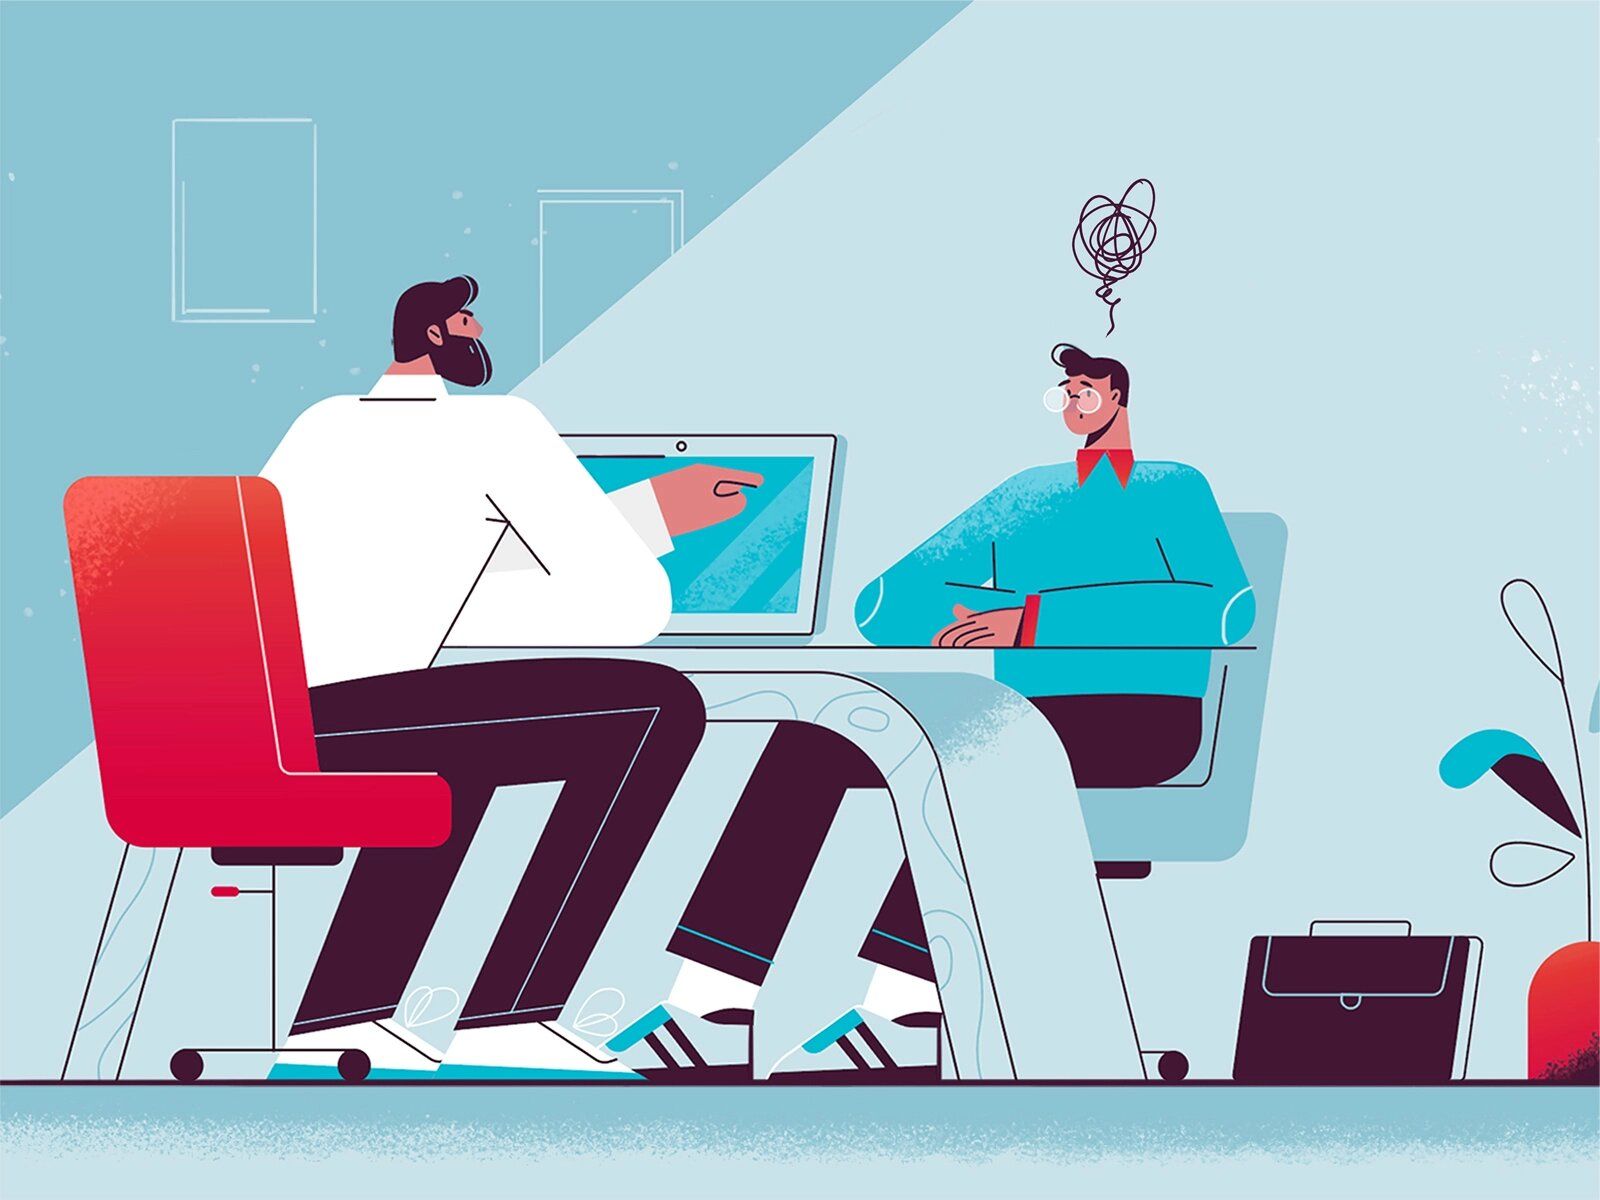 If you’d like to get tips on how to hire remote software developers for SaaS platform development, read on! (*image by [Anastasia Golub](https://dribbble.com/ANASTASIAGOLUB){ rel="nofollow" target="_blank" .default-md}*)